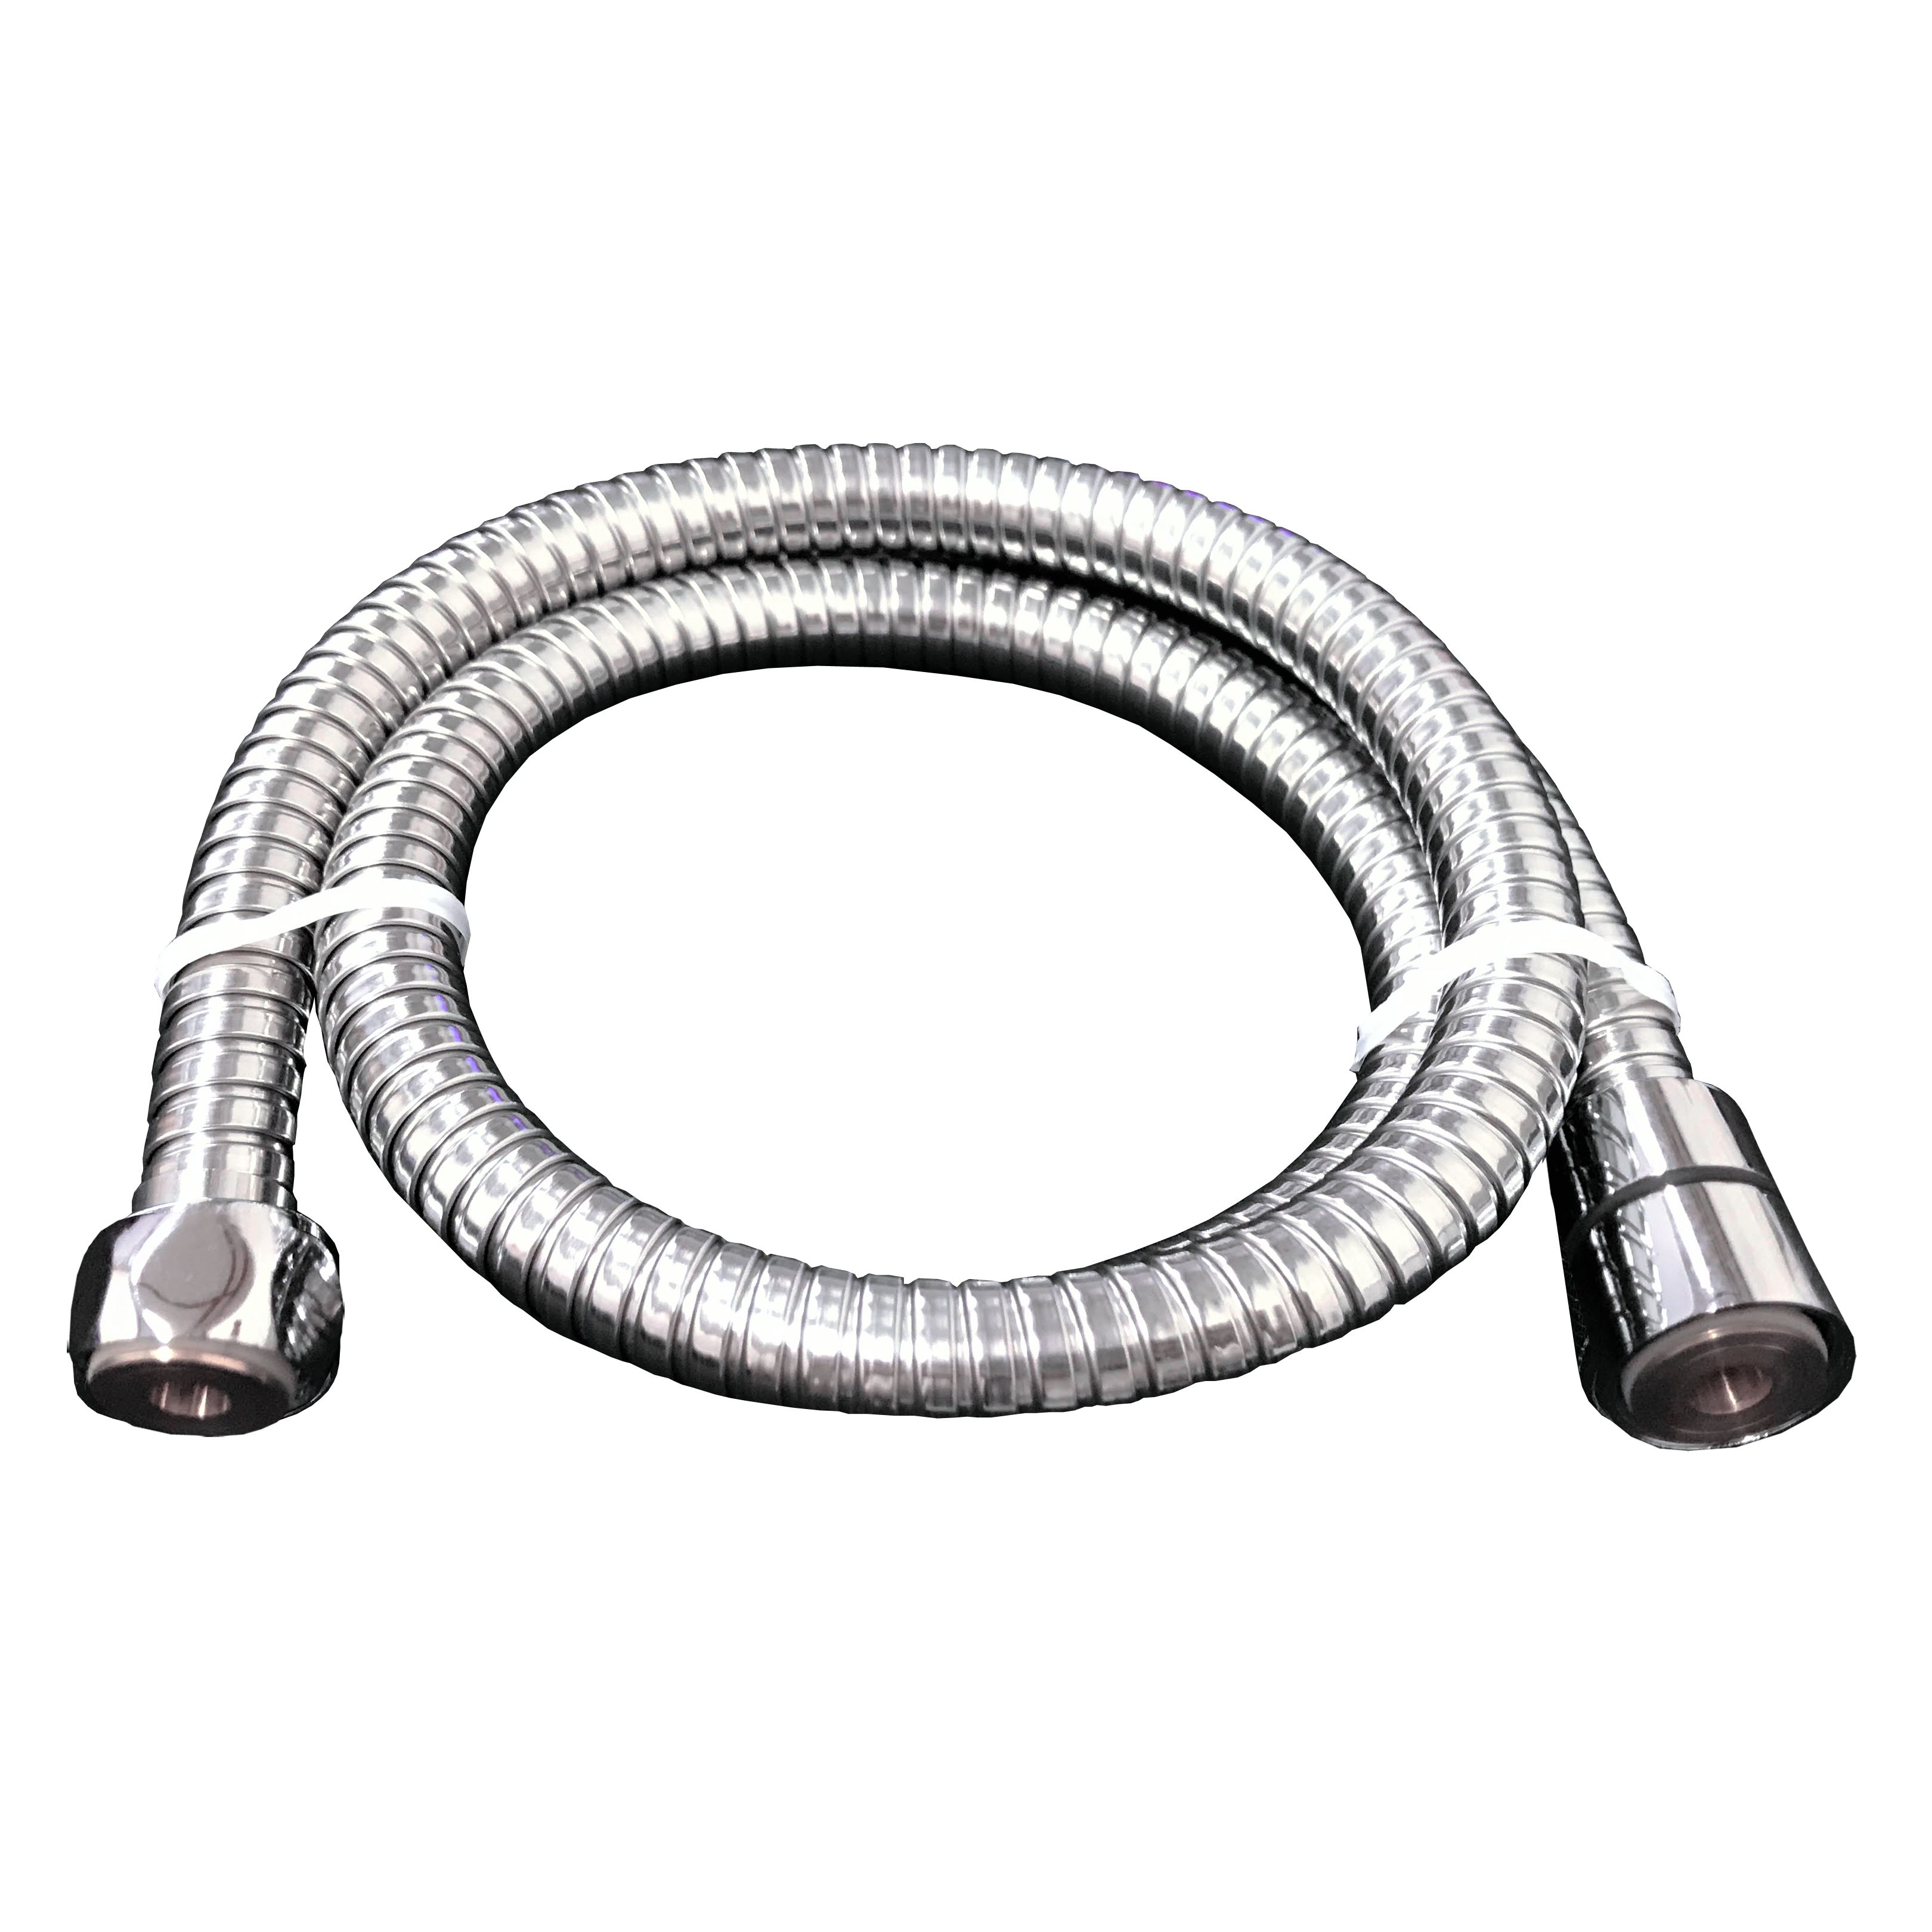 HUSKY 126-2m (7' Stainless Steel Double Lock Conical Flexible Hose)